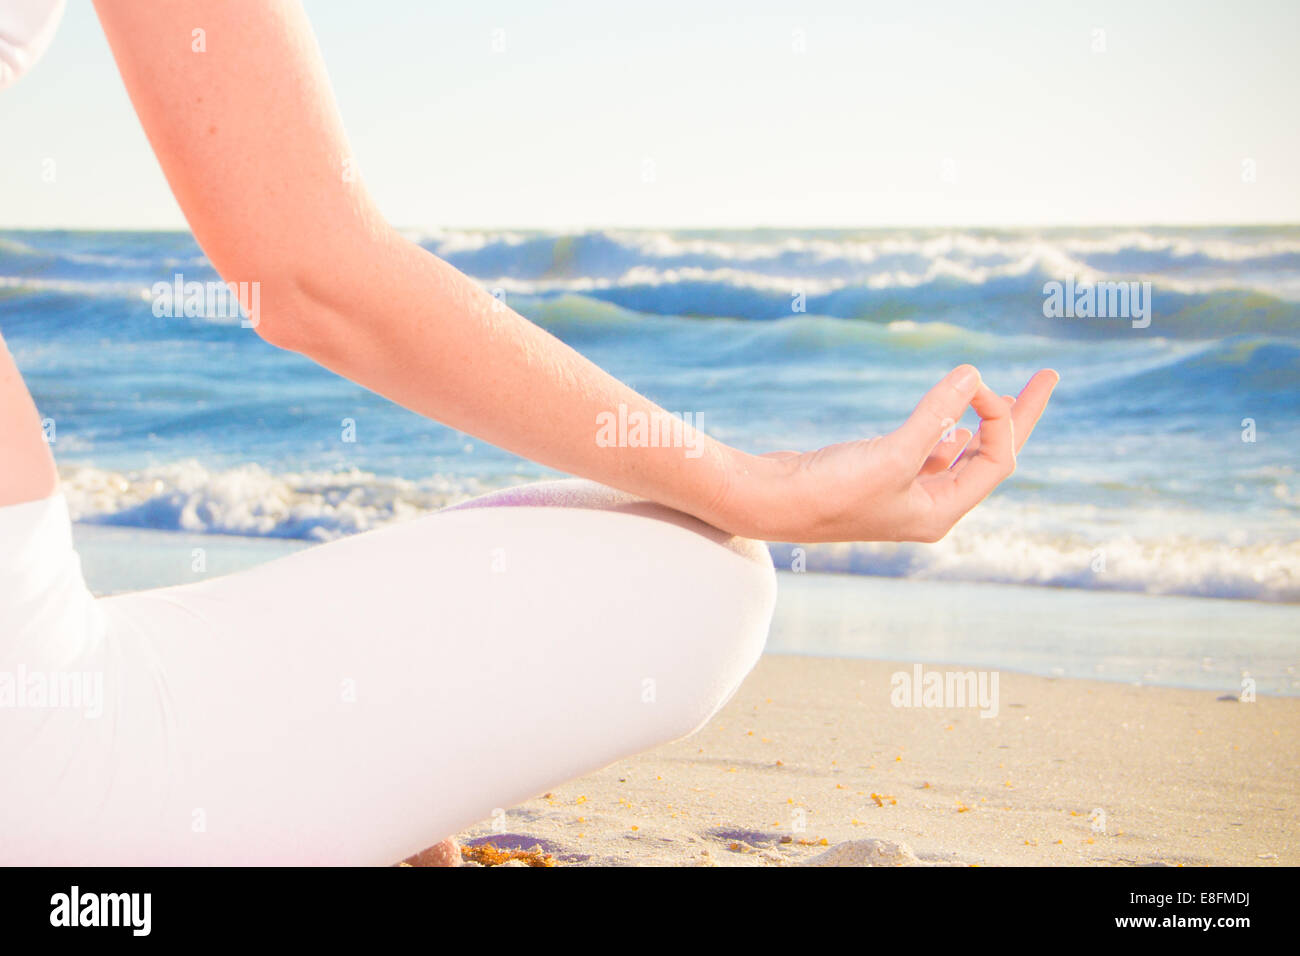 Woman practicing yoga on beach Banque D'Images